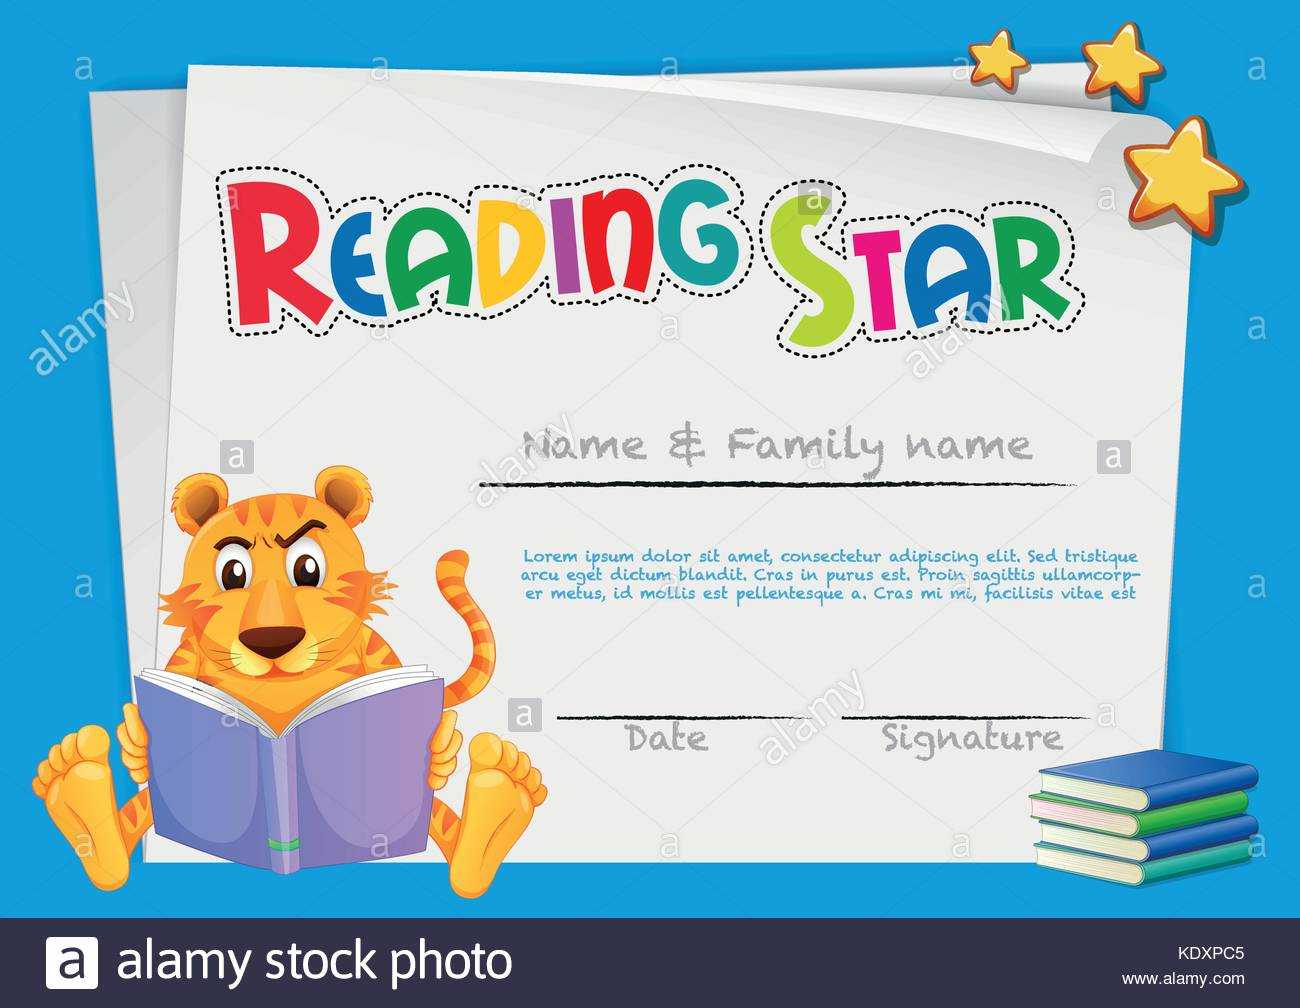 Certificate Template For Reading Award Illustration Stock Within Star Award Certificate Template